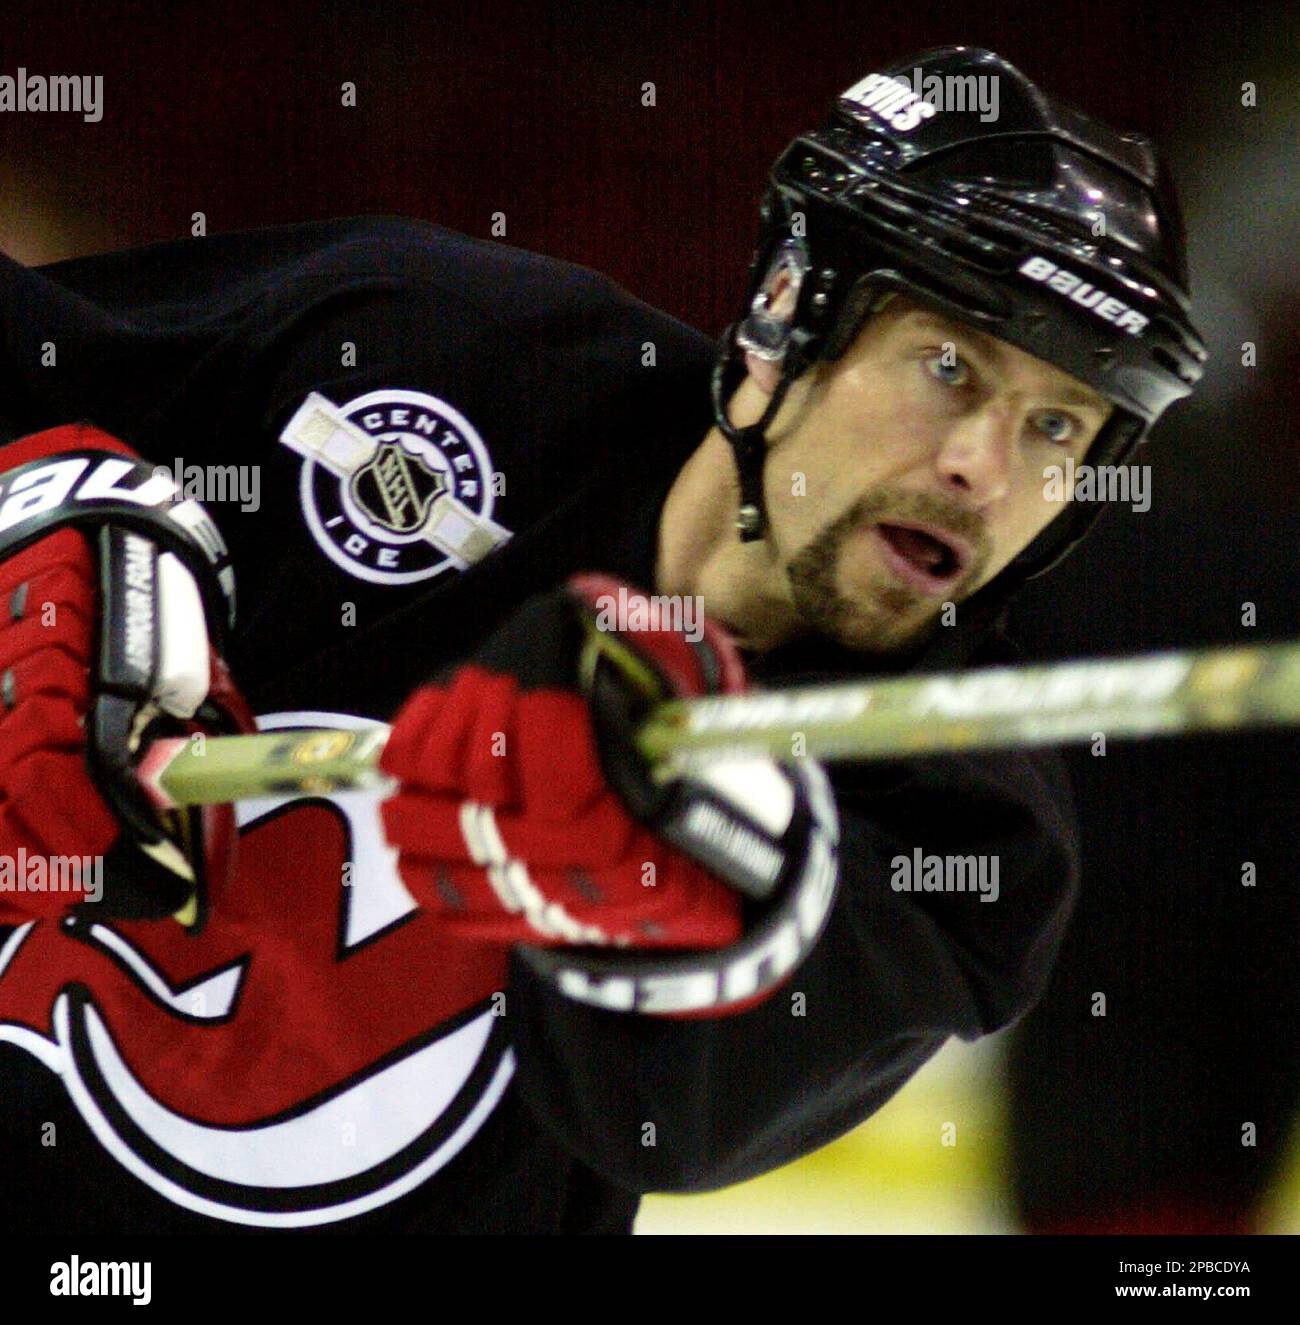 KRT SPORTS STORY SLUGGED: STANLEYCUP KRT PHOTOGRAPH BY DARRELL BYERS/FORT  WORTH STAR-TELEGRAM (DALLAS OUT) (June 11) New Jersey Devils' captain, and  game MVP, Scott Stevens is the first to lift the Stanley